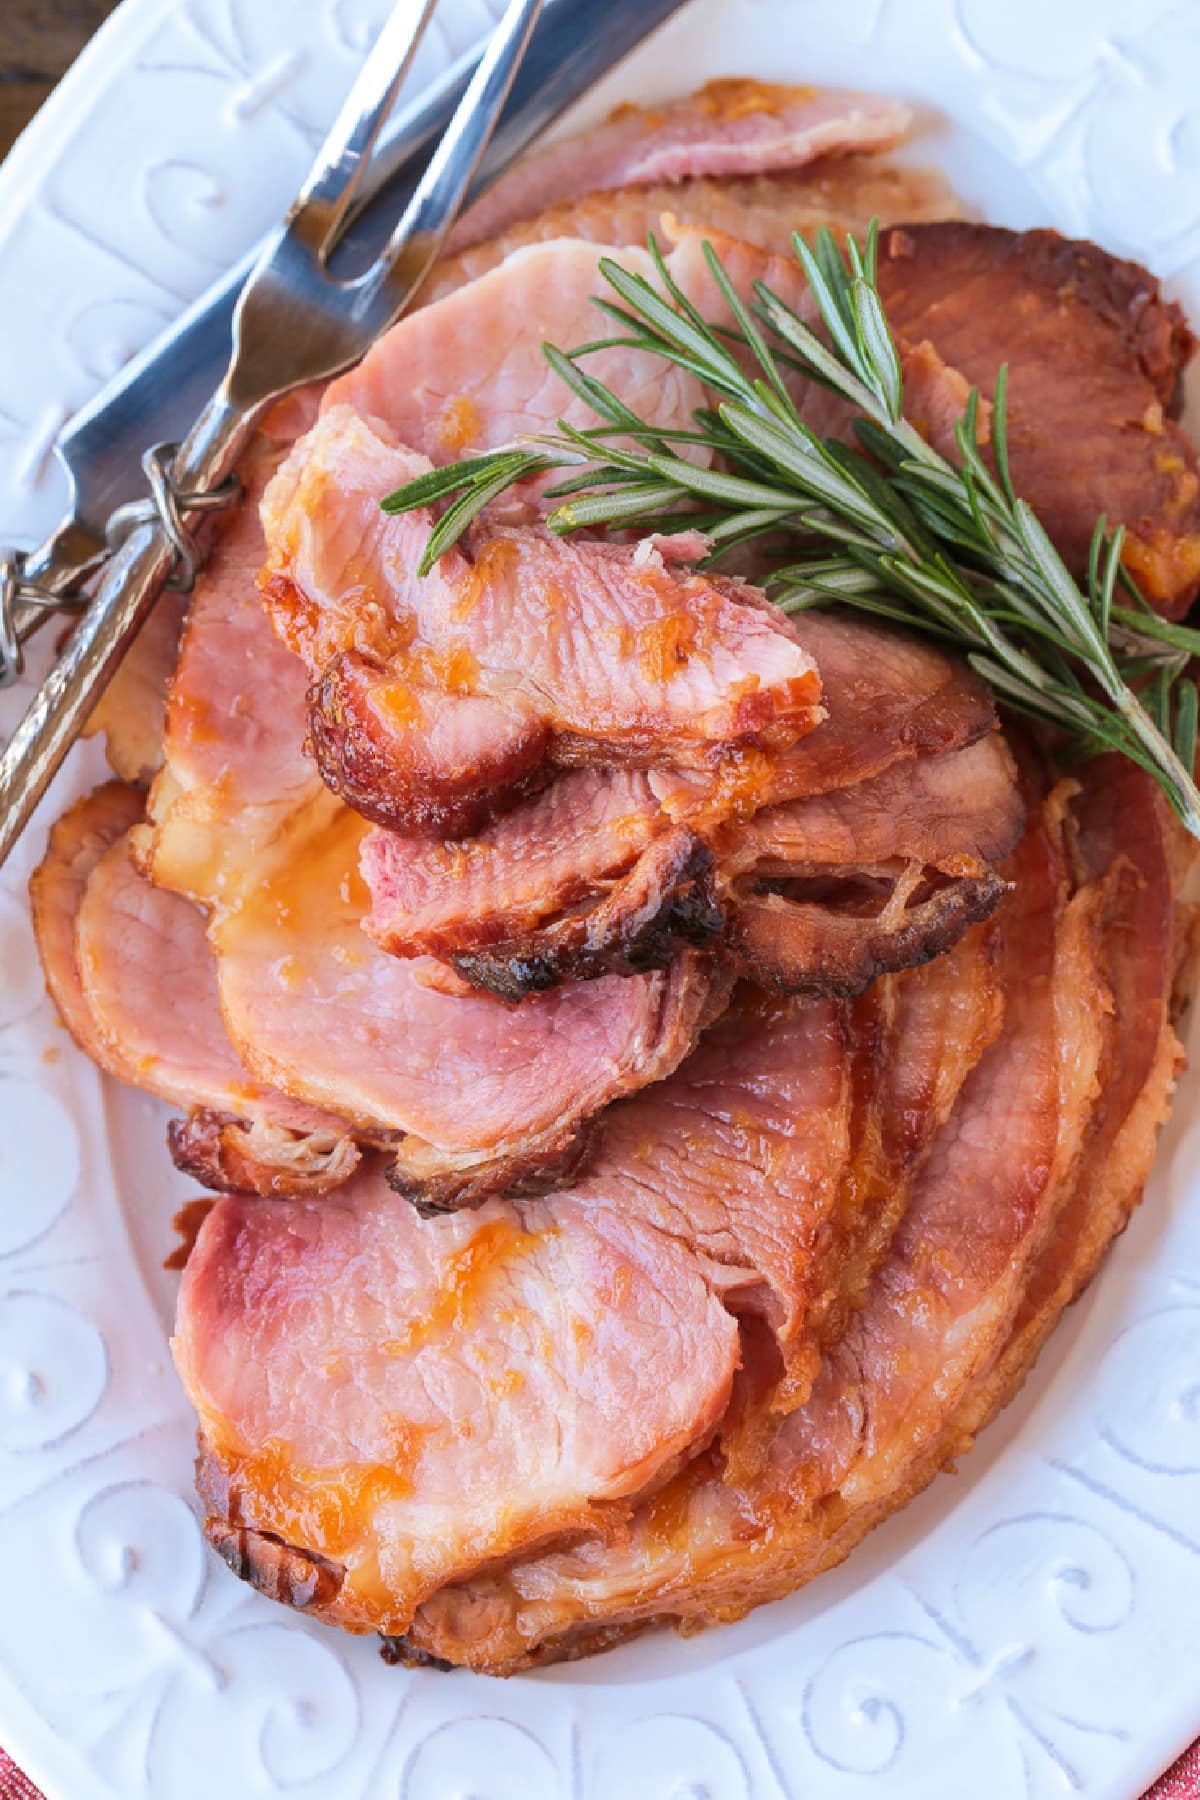 sliced ham on a platter with serving utensils and rosemary